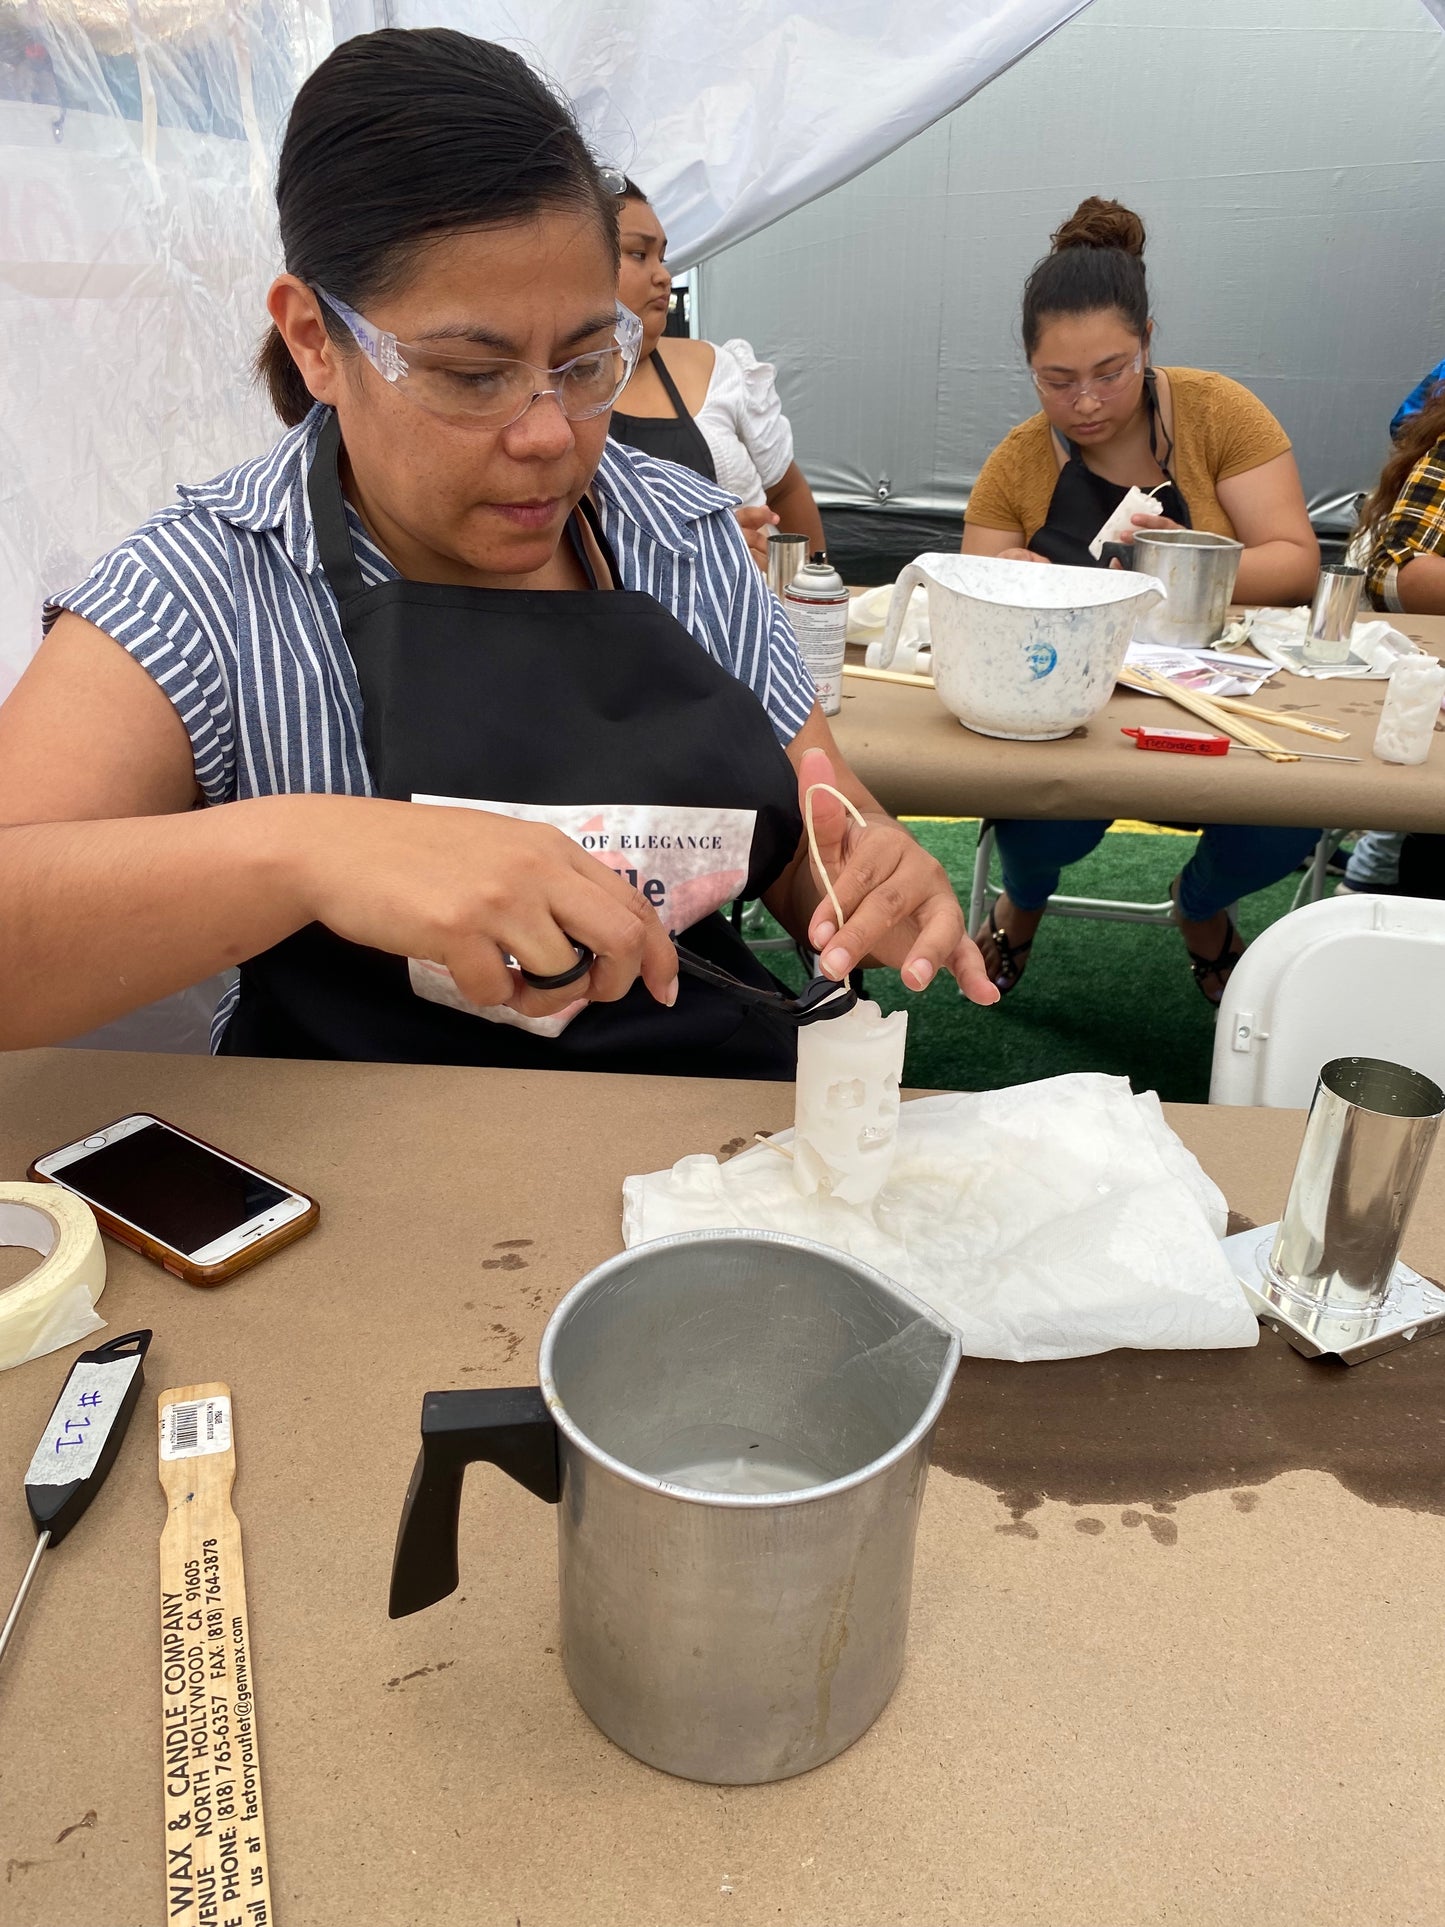 Pop-up Candle Making Classes